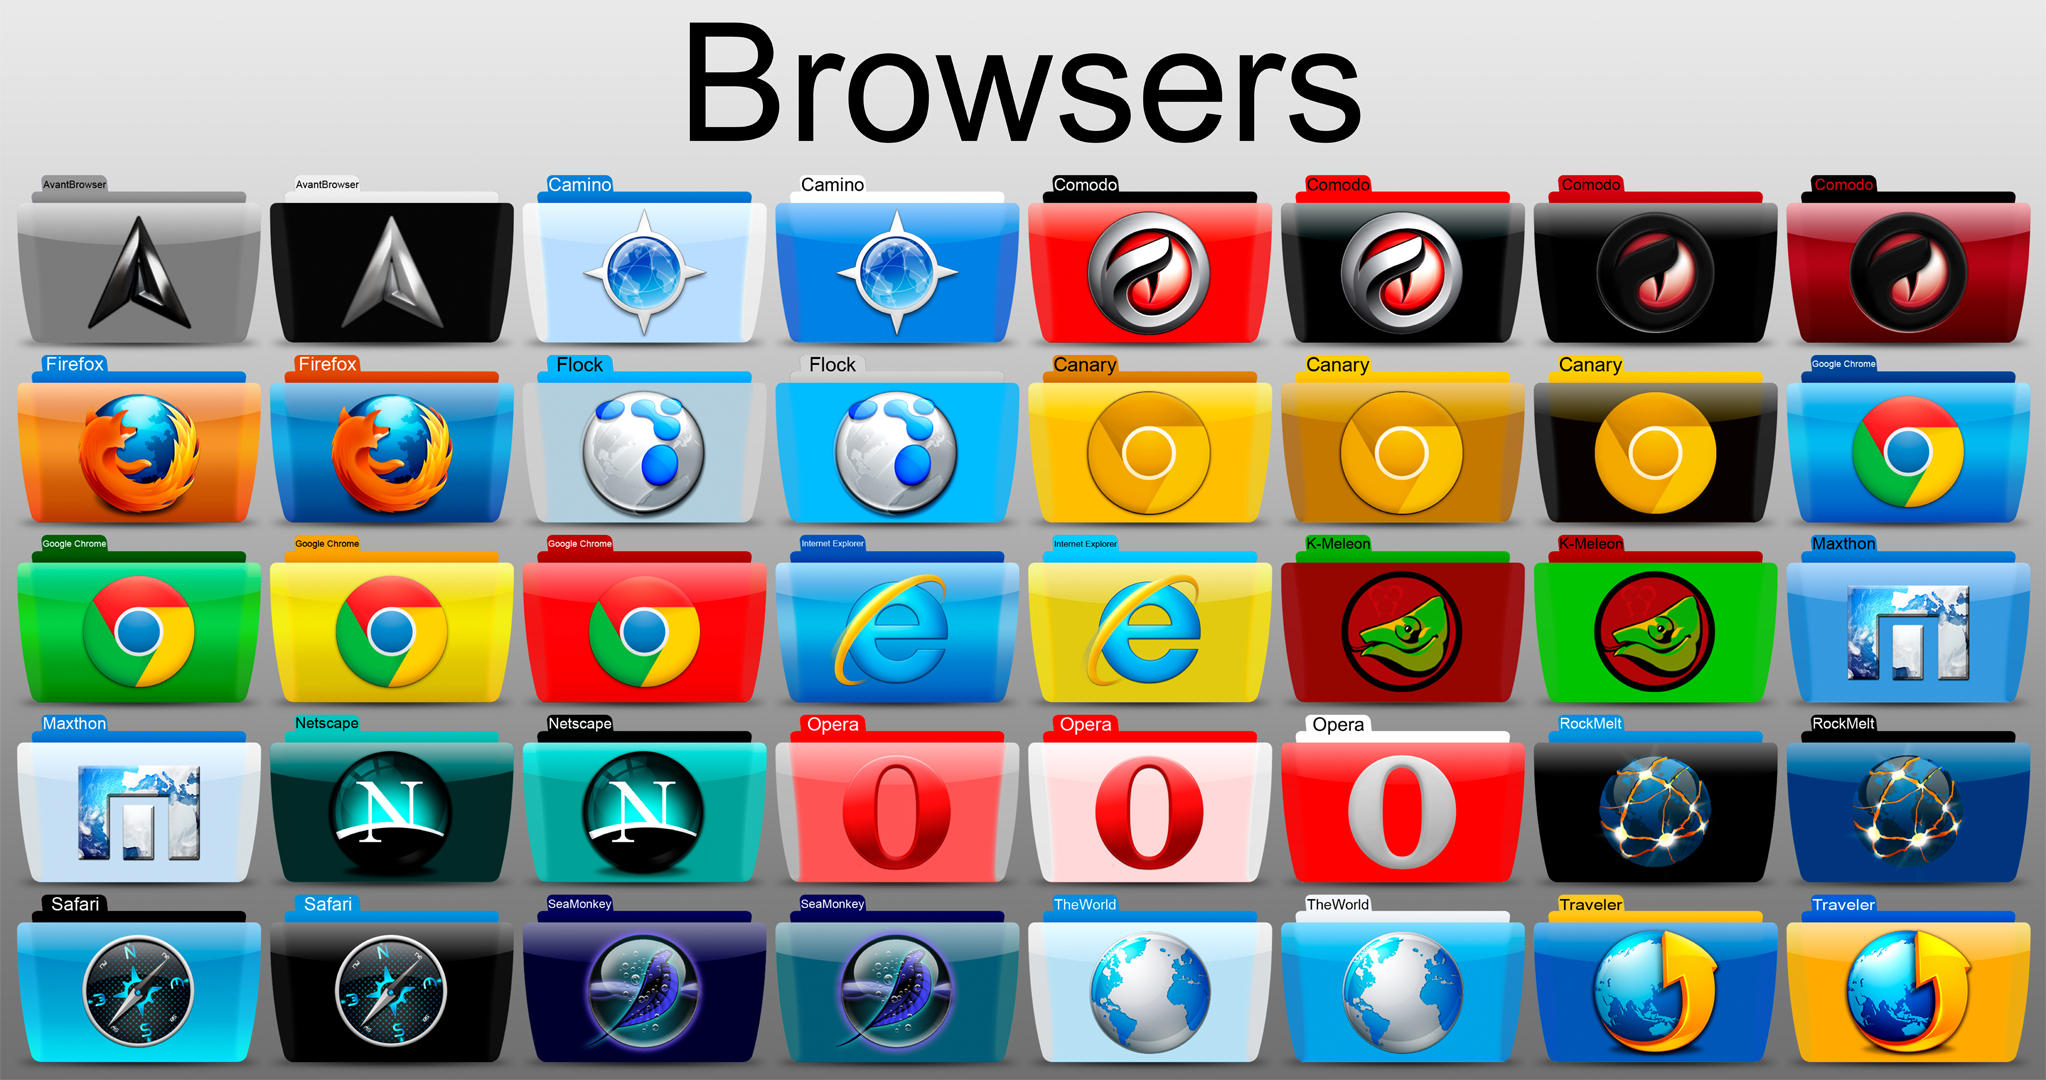 Browsers Colorflow by SamirPA on DeviantArt